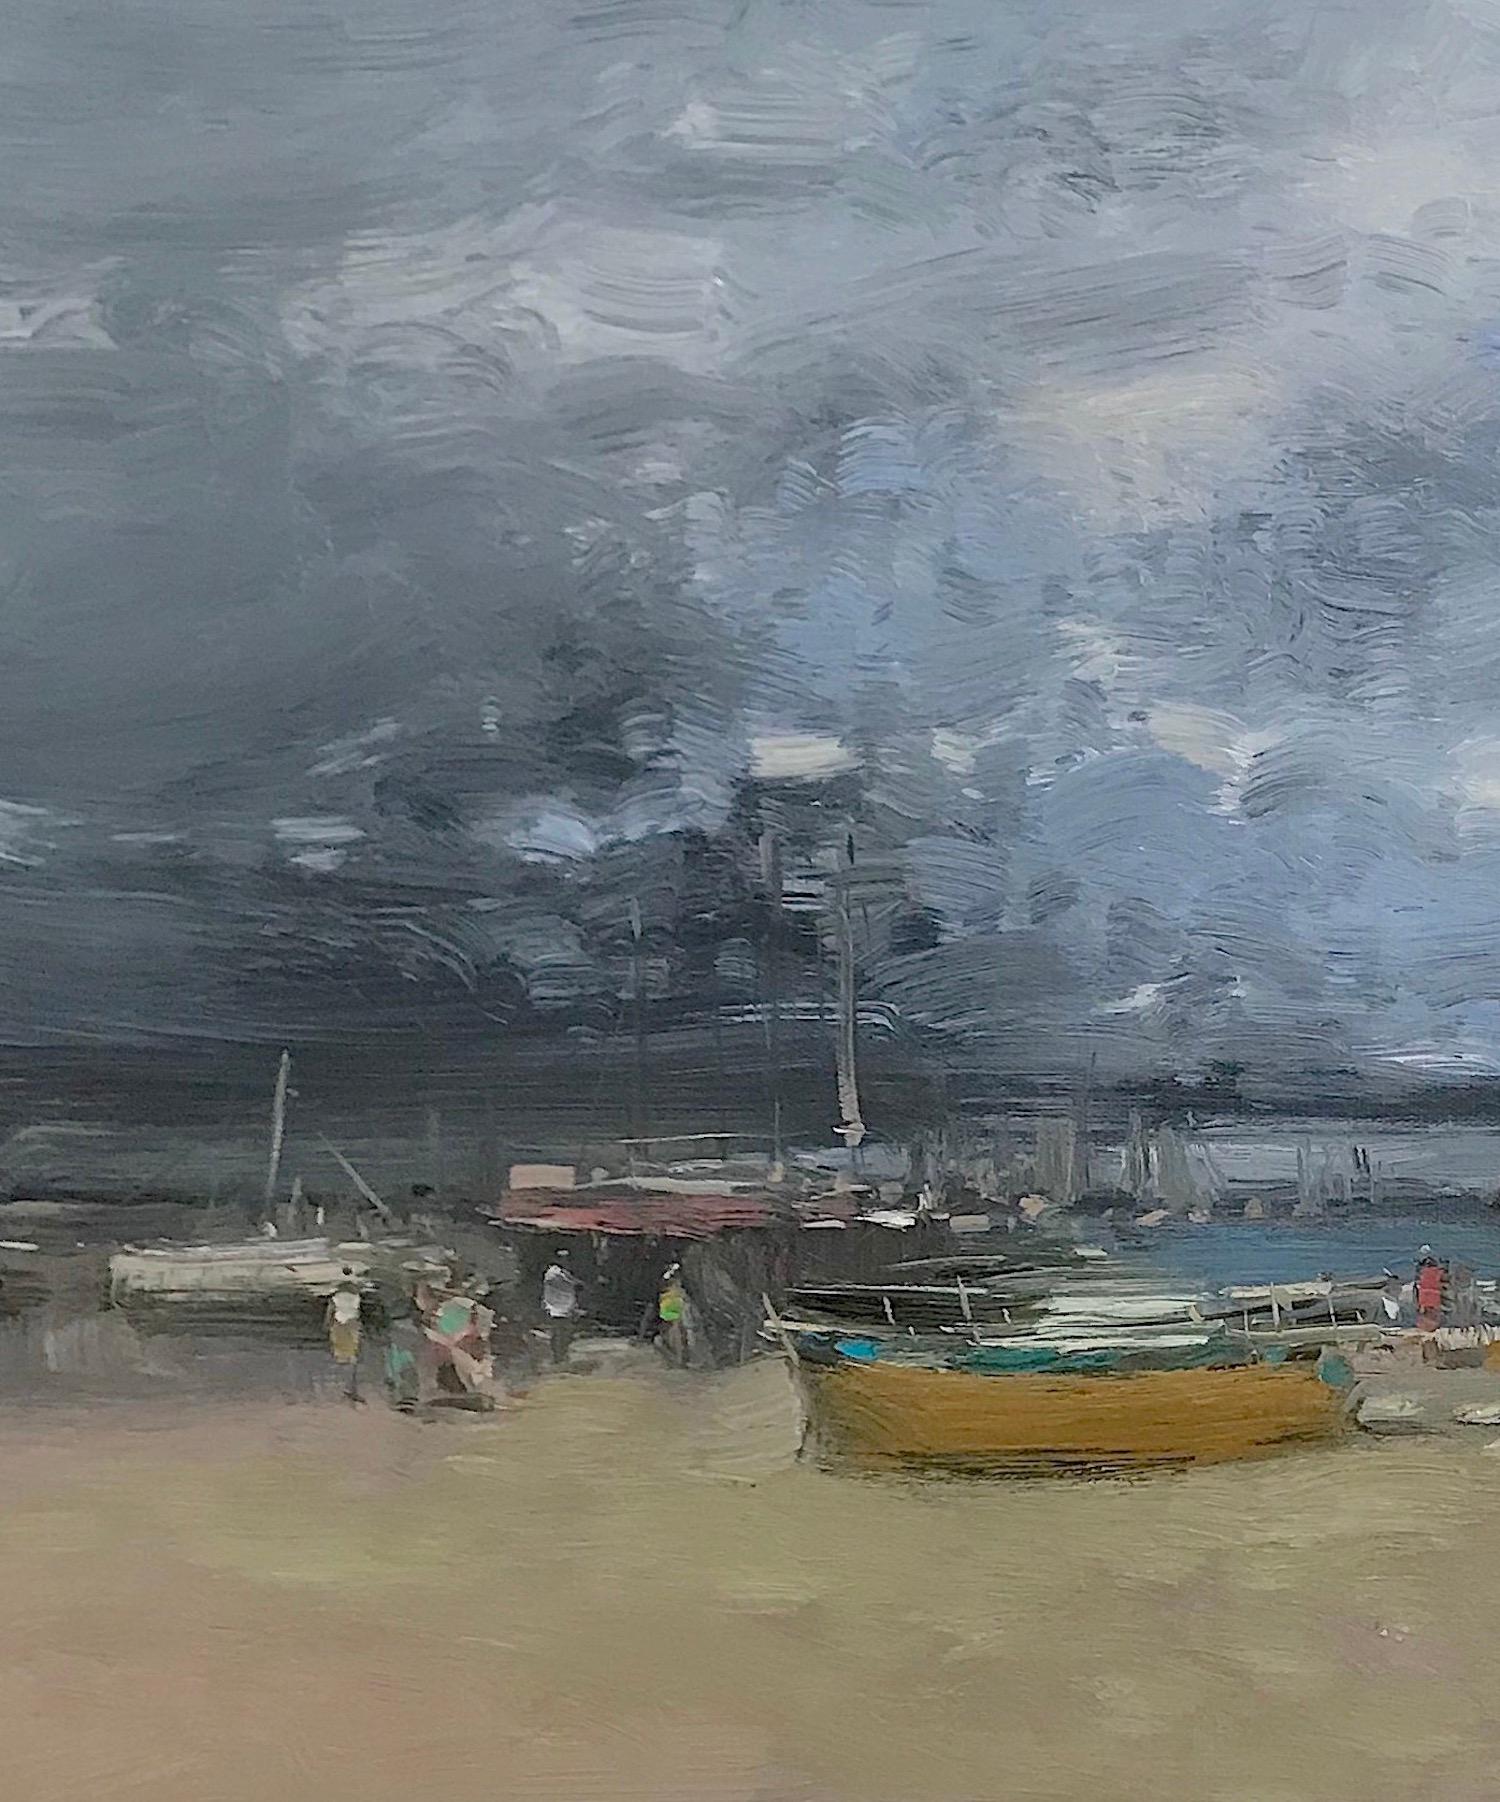 <p>Artist Comments<br />Seaside dock on a moody afternoon. Workers secure their ships as a storm approaches. Inspired by classical Dutch and French harbor scenes.</p><br /><p>About the Artist<br />Los Angeles-based and Armenian-born artist, Vahe